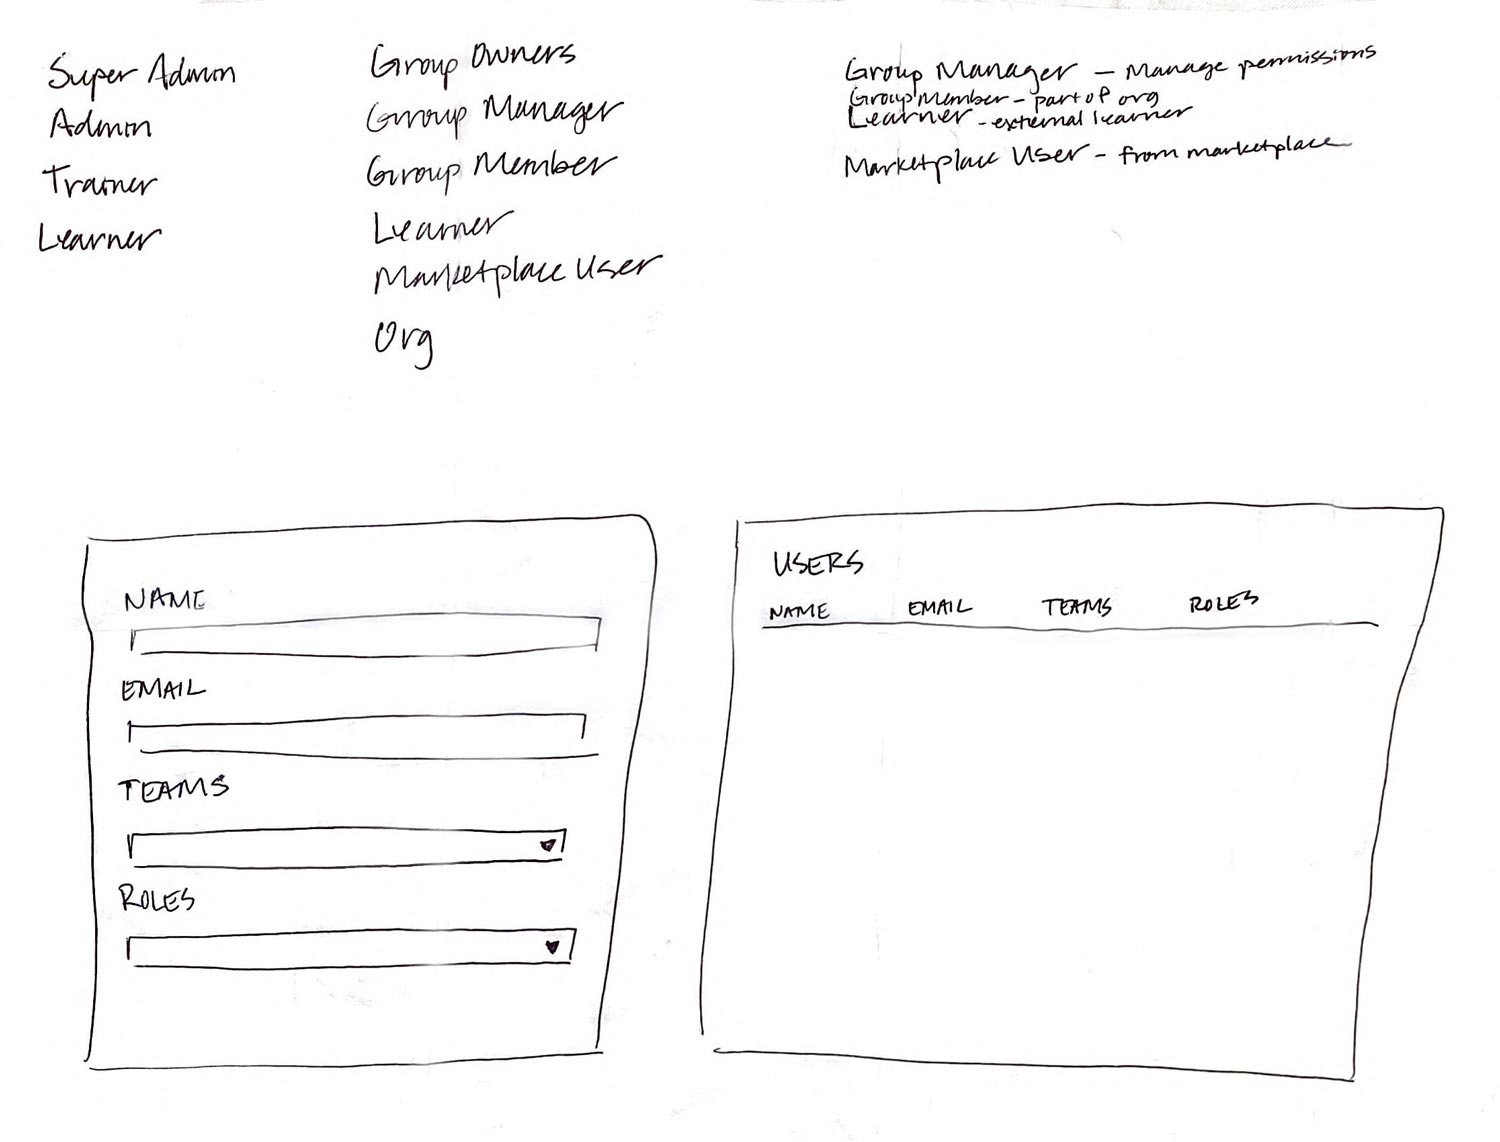 SkillSuite - Wireframes - Groups, Permissions 2